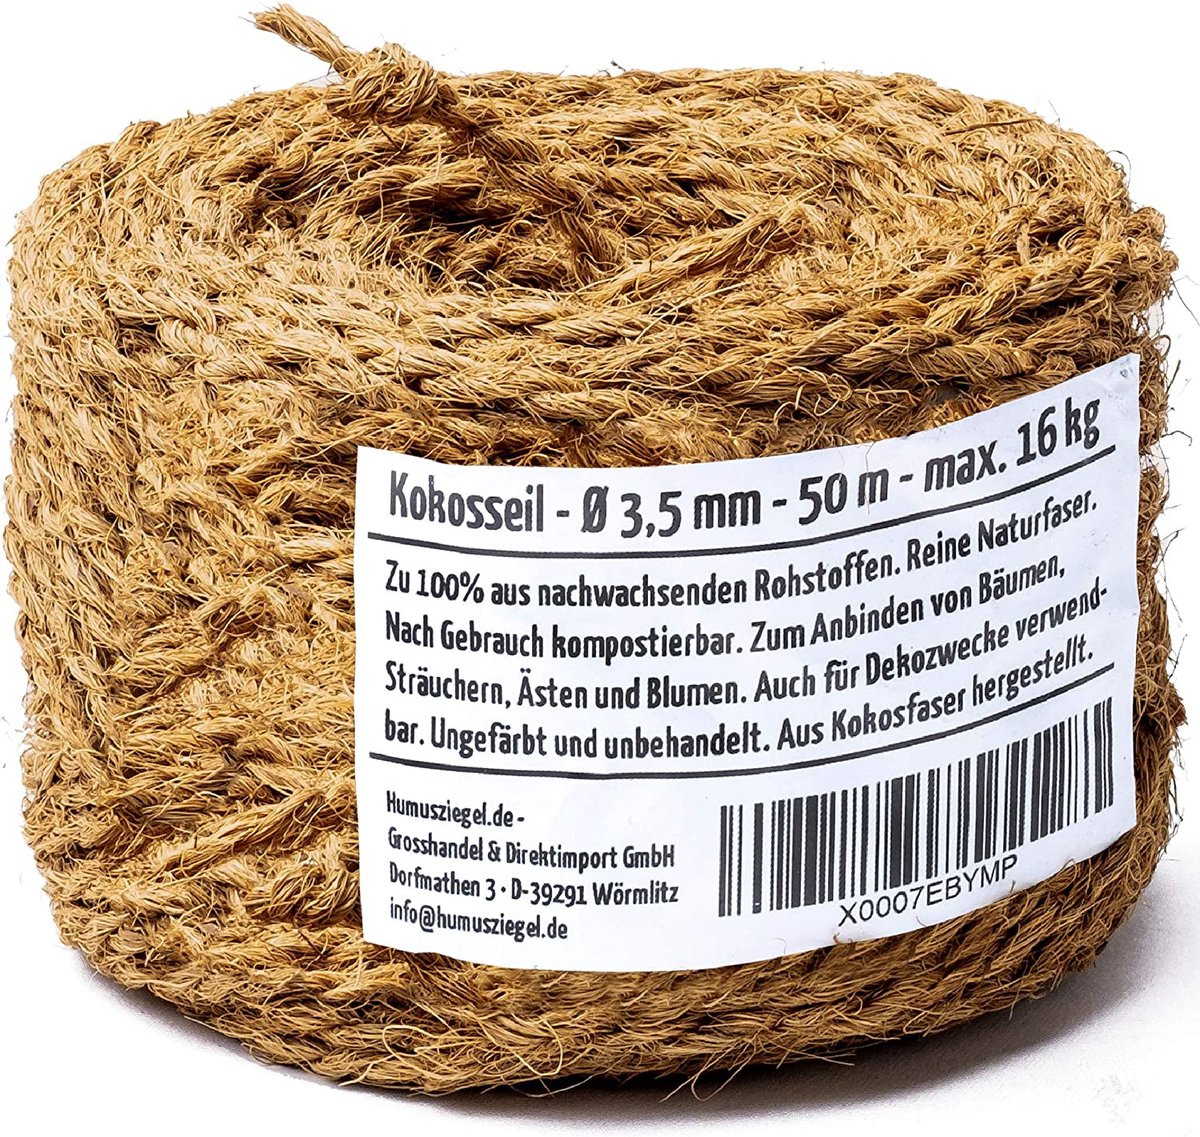 Humusziegel Jute Rope Roll - Coconut Fibre Natural Jute Twine String - Strong Brown String for Crafts, Garden 3.5mm - 50m 3.5 mm / 50 m Roll